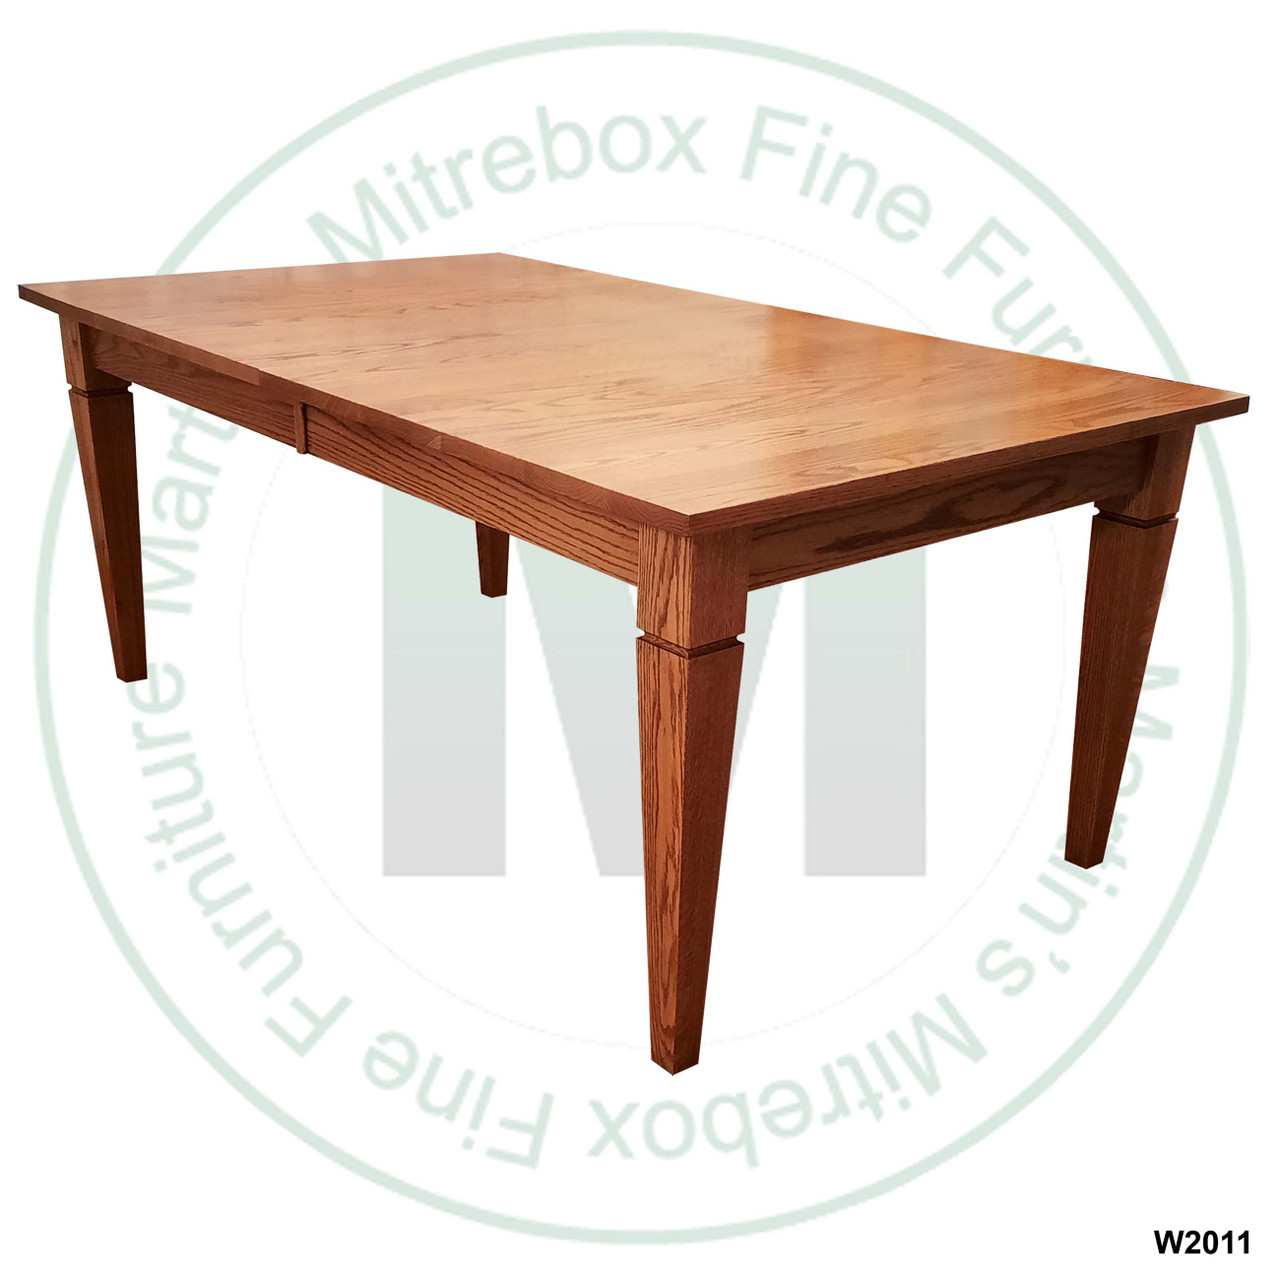 Oak Reesor Solid Top Harvest Table 36''D x 36''W x 30''H Table Has 1.25'' Thick Top And 2 - 16'' Extensions